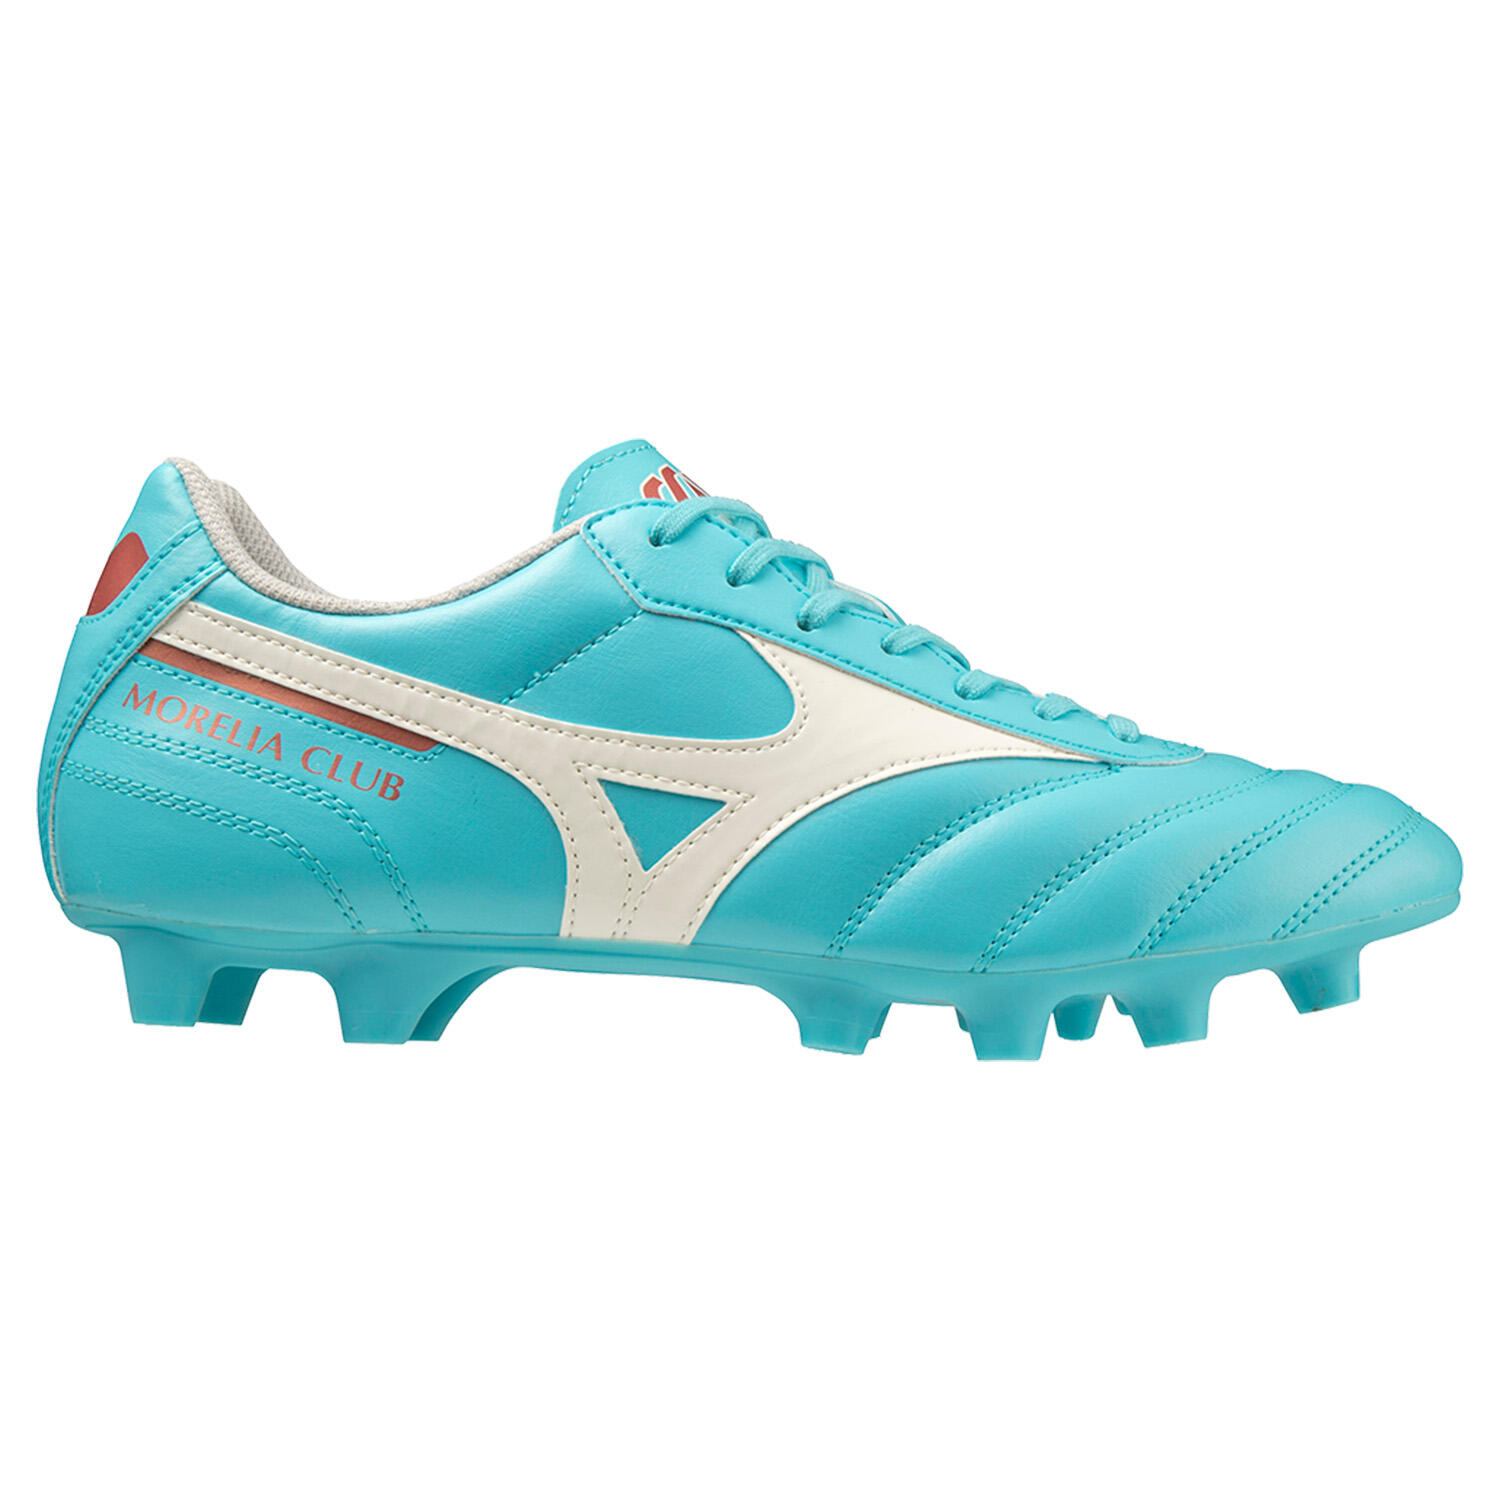 Mizuno Morelia Club Mens Firm Ground Rugby Boots 1/4